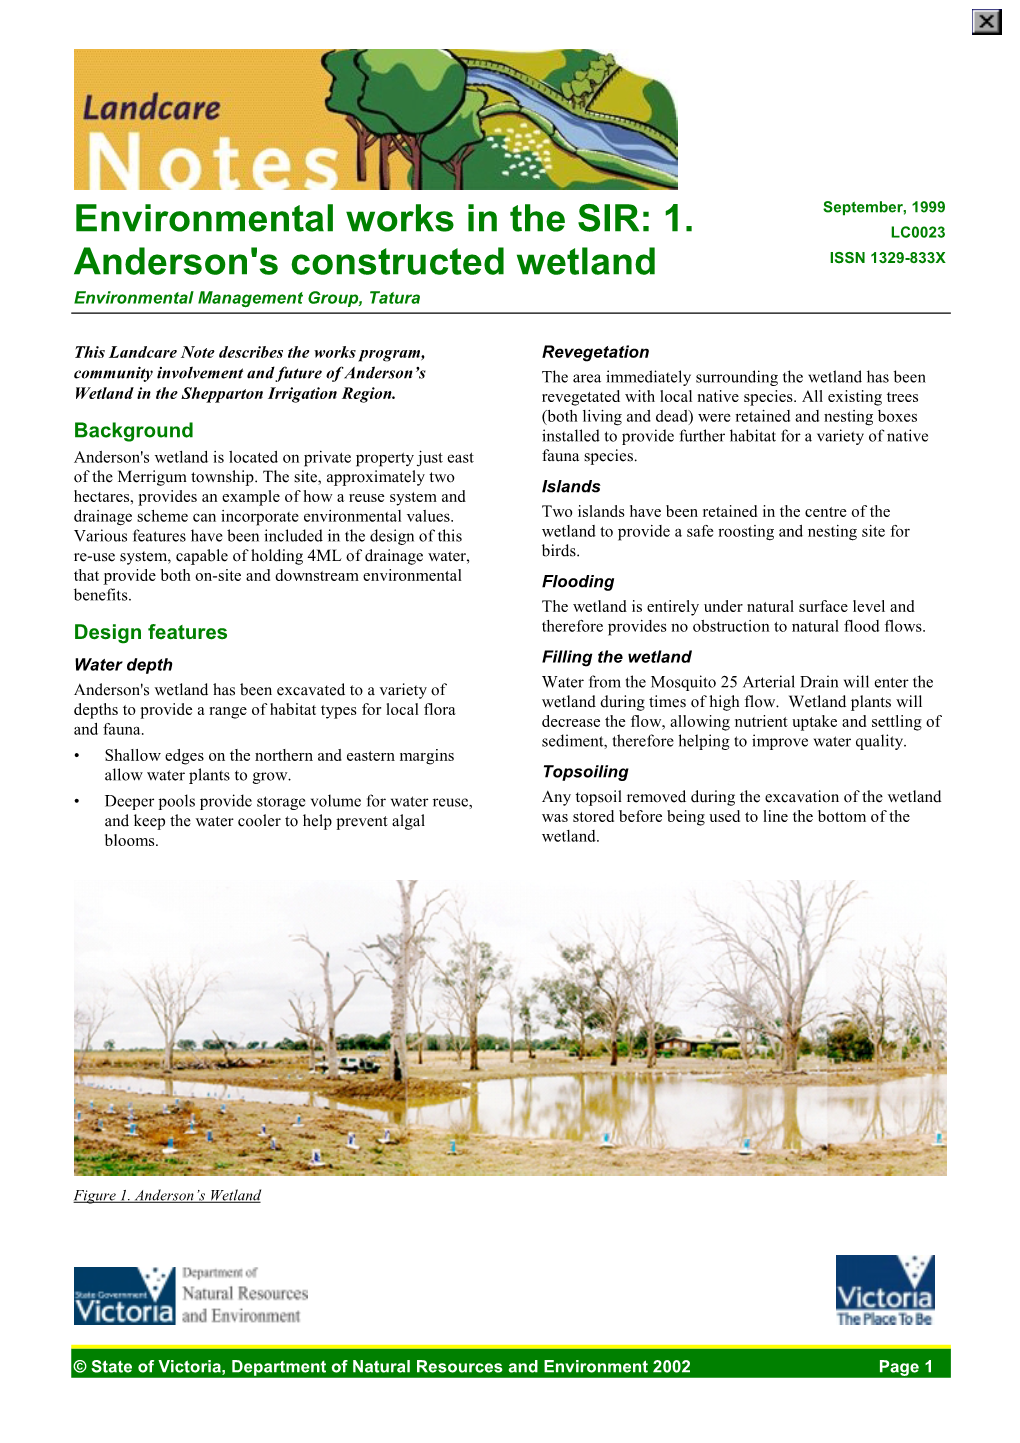 Environmental Works in the SIR: 1. Anderson's Constructed Wetland (VIC)